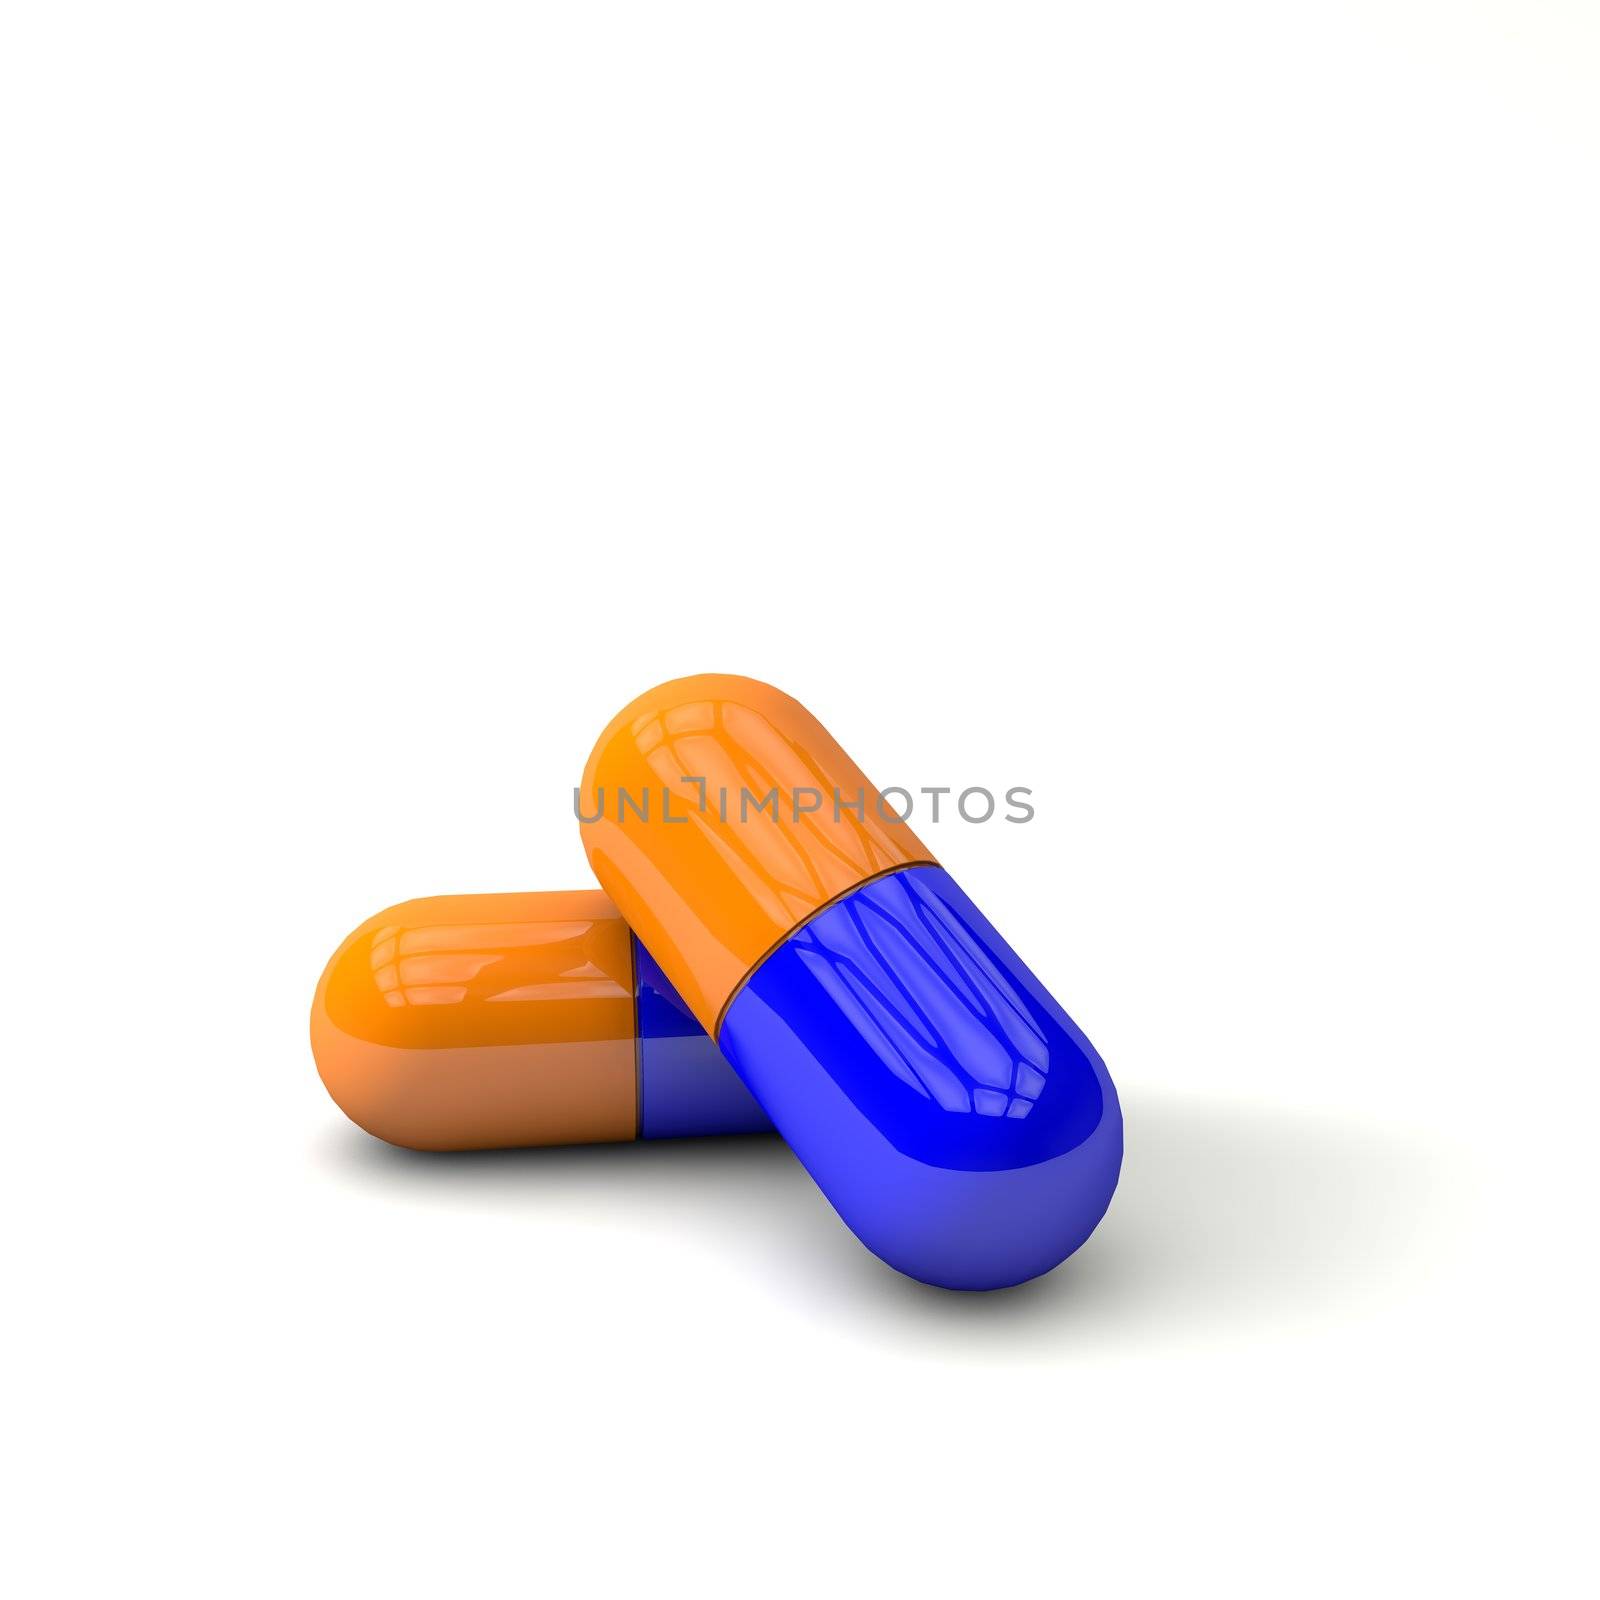 The pills of the decisions. I take the blue capsule or the Red Pill?